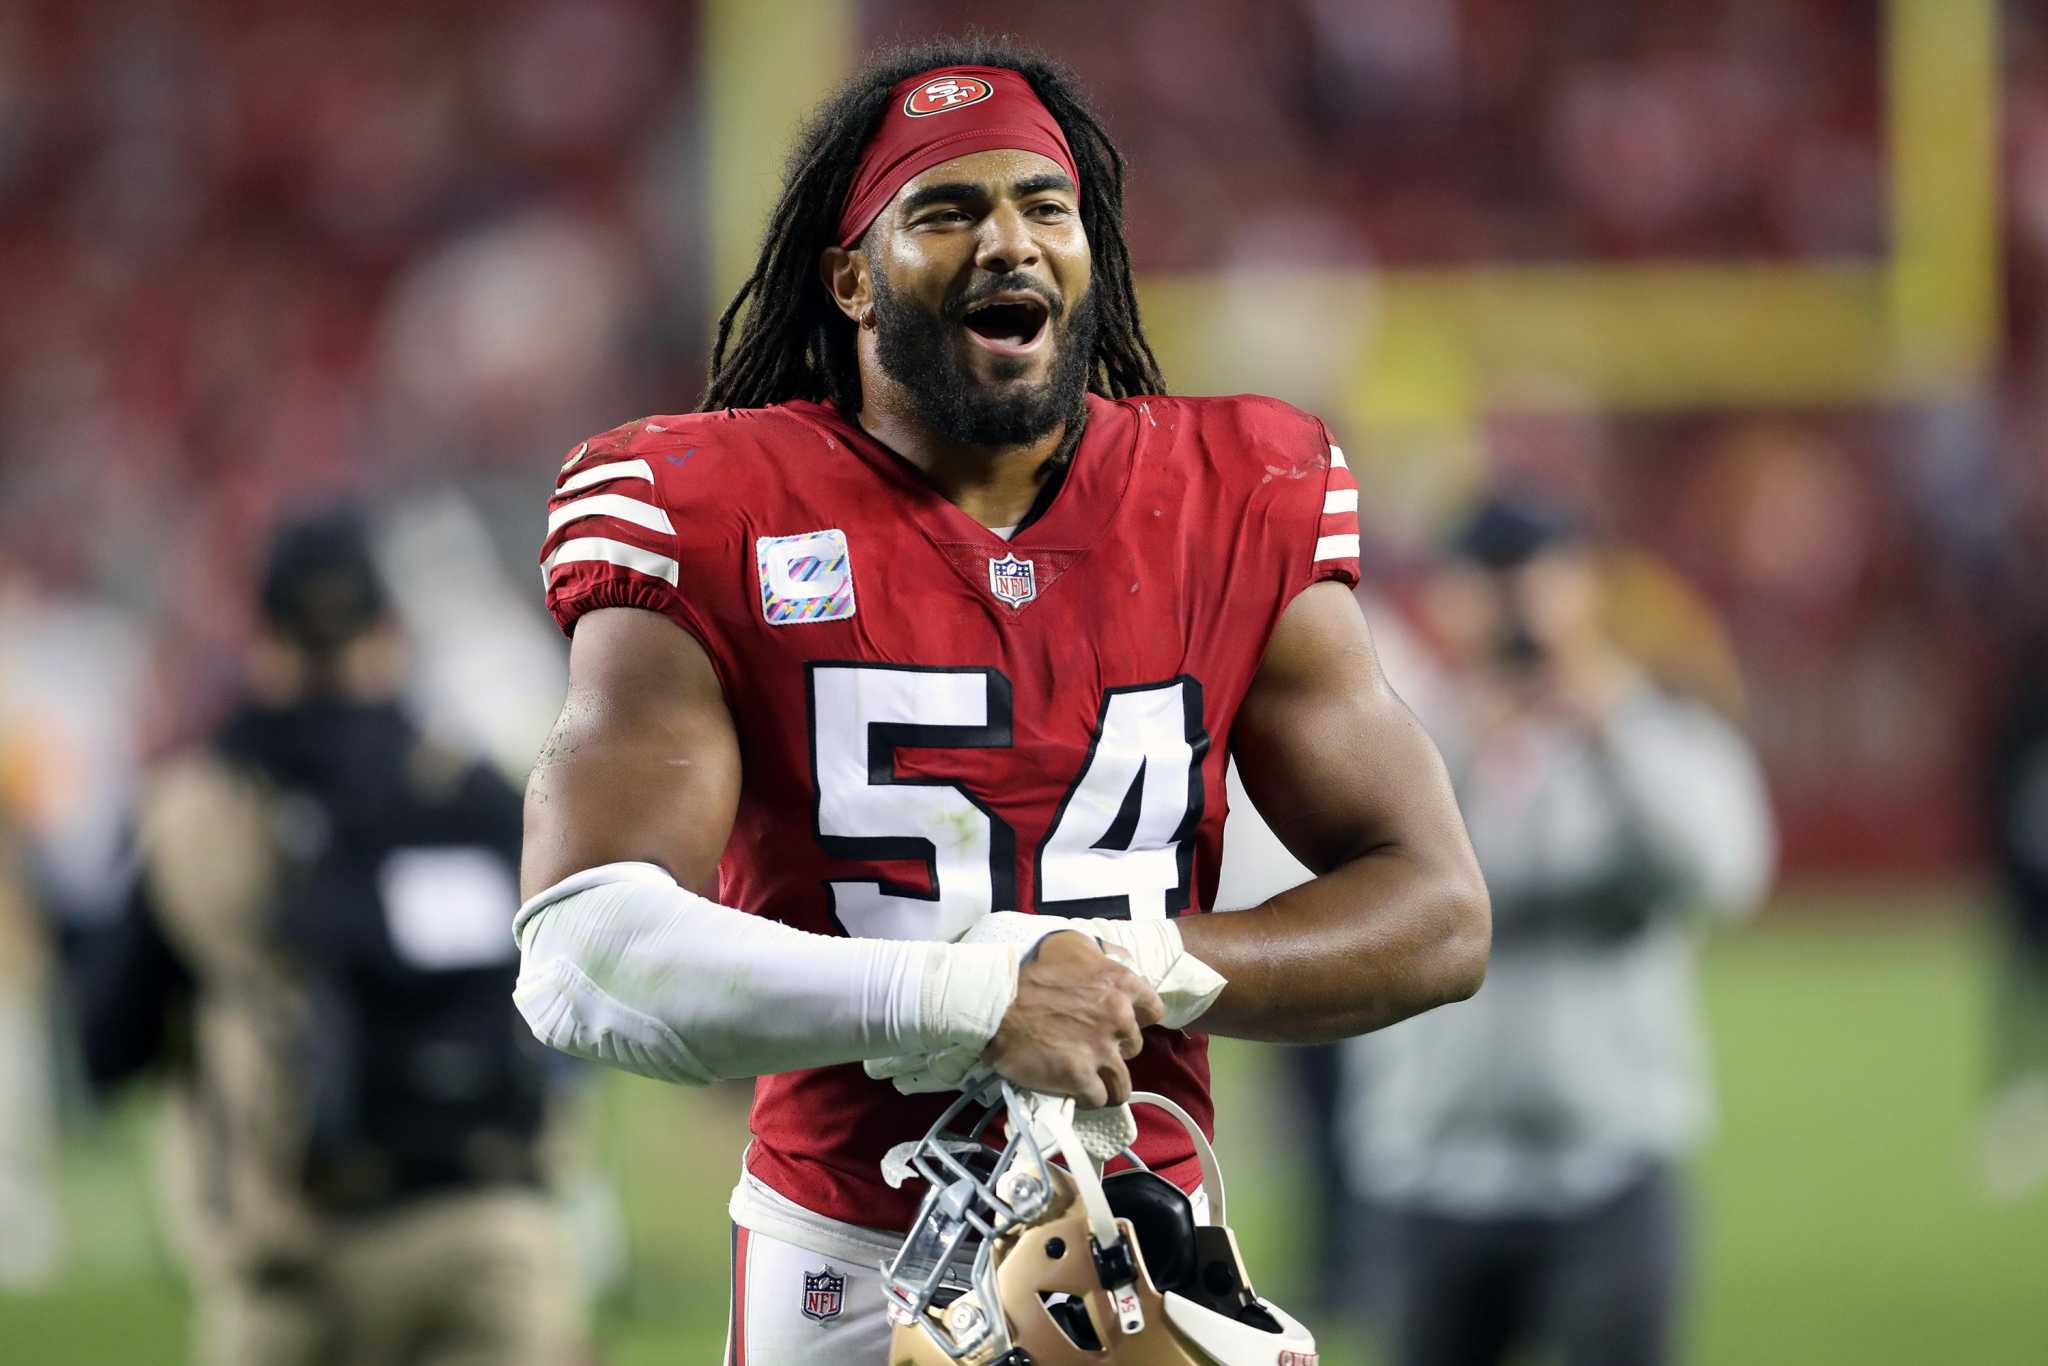 49ers' Fred Warner hopes to inspire in Mexico City by representing his roots